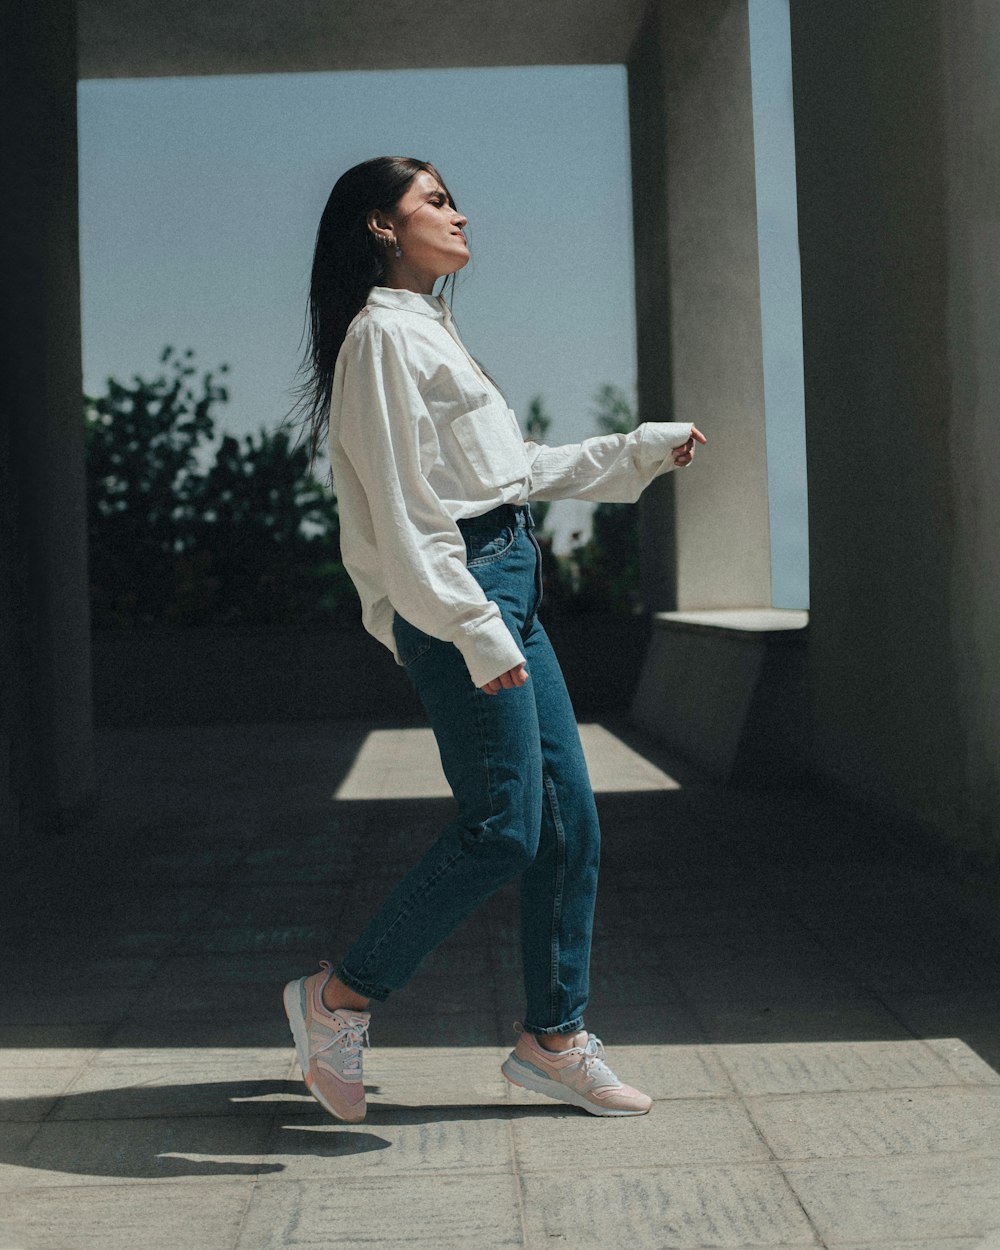 woman in white long sleeve shirt and blue denim jeans standing on gray concrete floor during